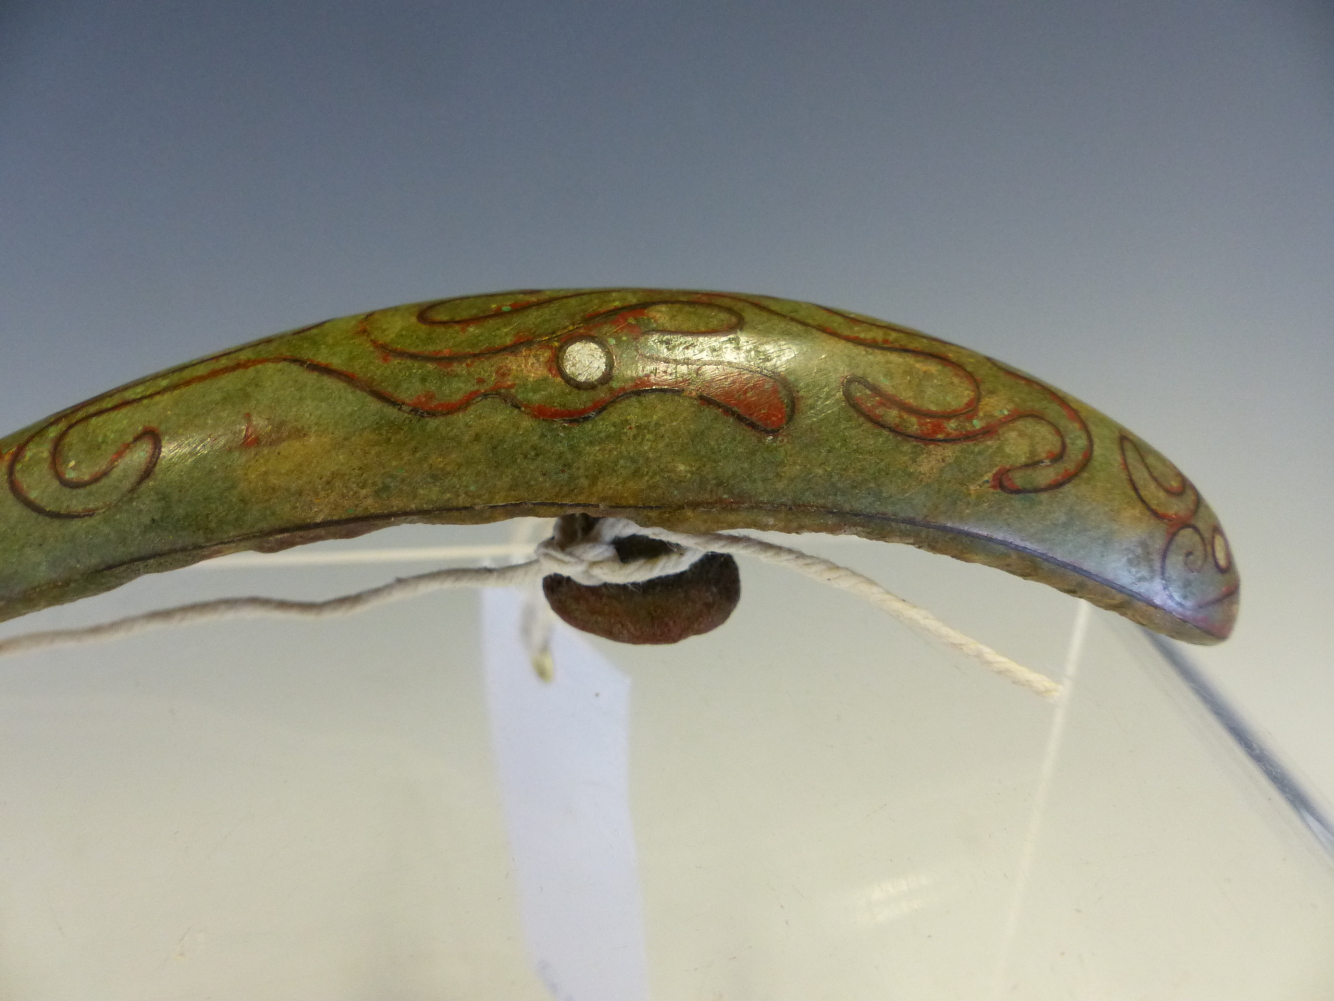 AN EARLY CHINESE BRONZE BELT HOOK, THE DRAGON FORM INLAID WITH COPPER WIRE AND SILVER STIPPLES. - Image 4 of 8